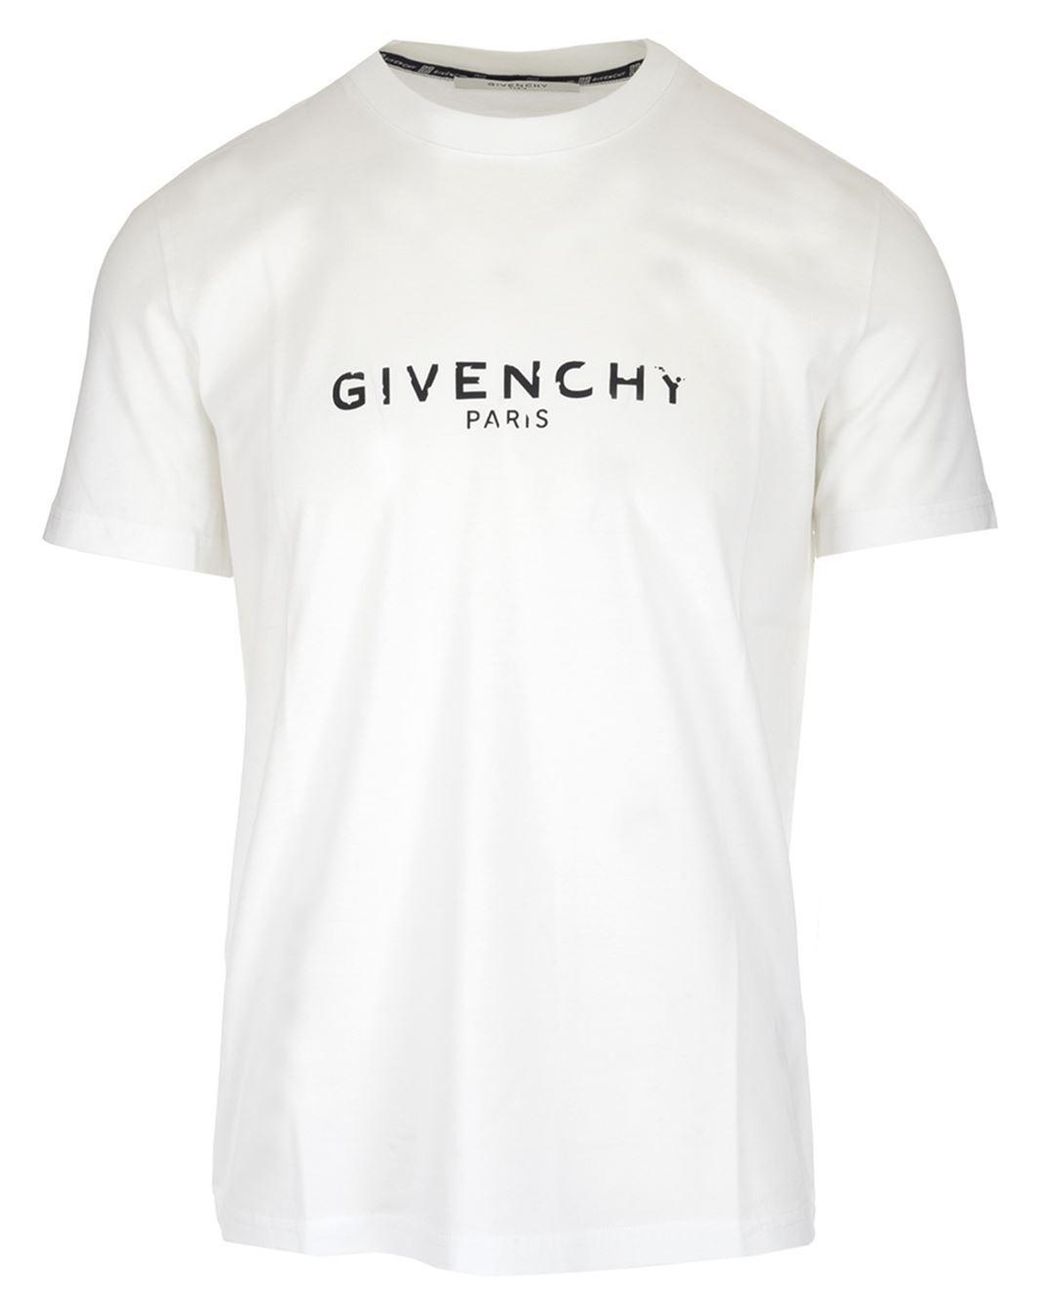 Givenchy Cotton Paris Slim Fit T-shirt in White for Men - Lyst